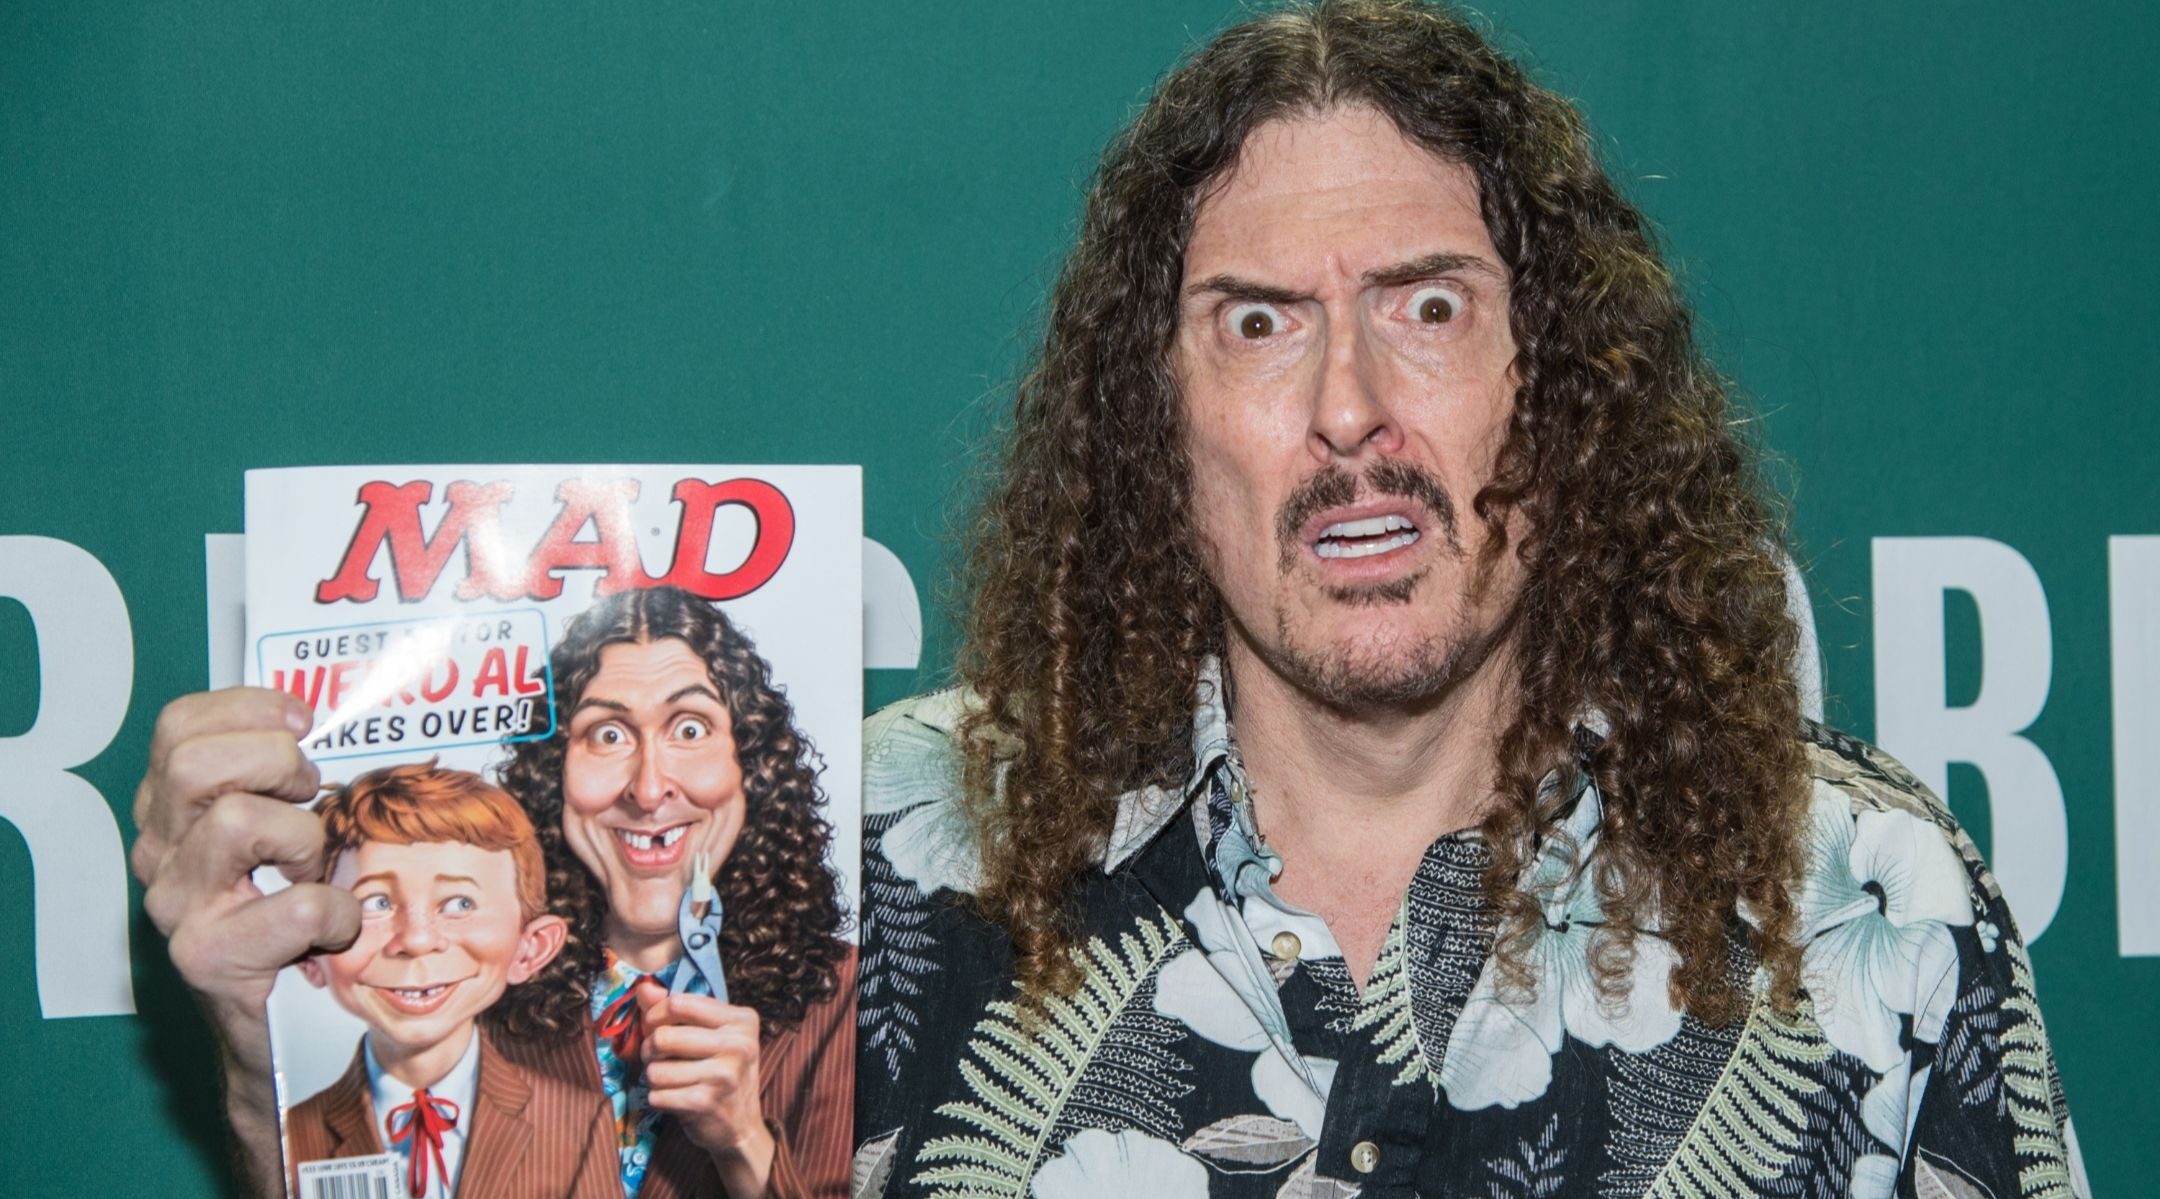 Singer Weird Al Yankovic with his Mad Magazine cover in New York City, April 20, 2015. (Mark Sagliocco/Getty Images)